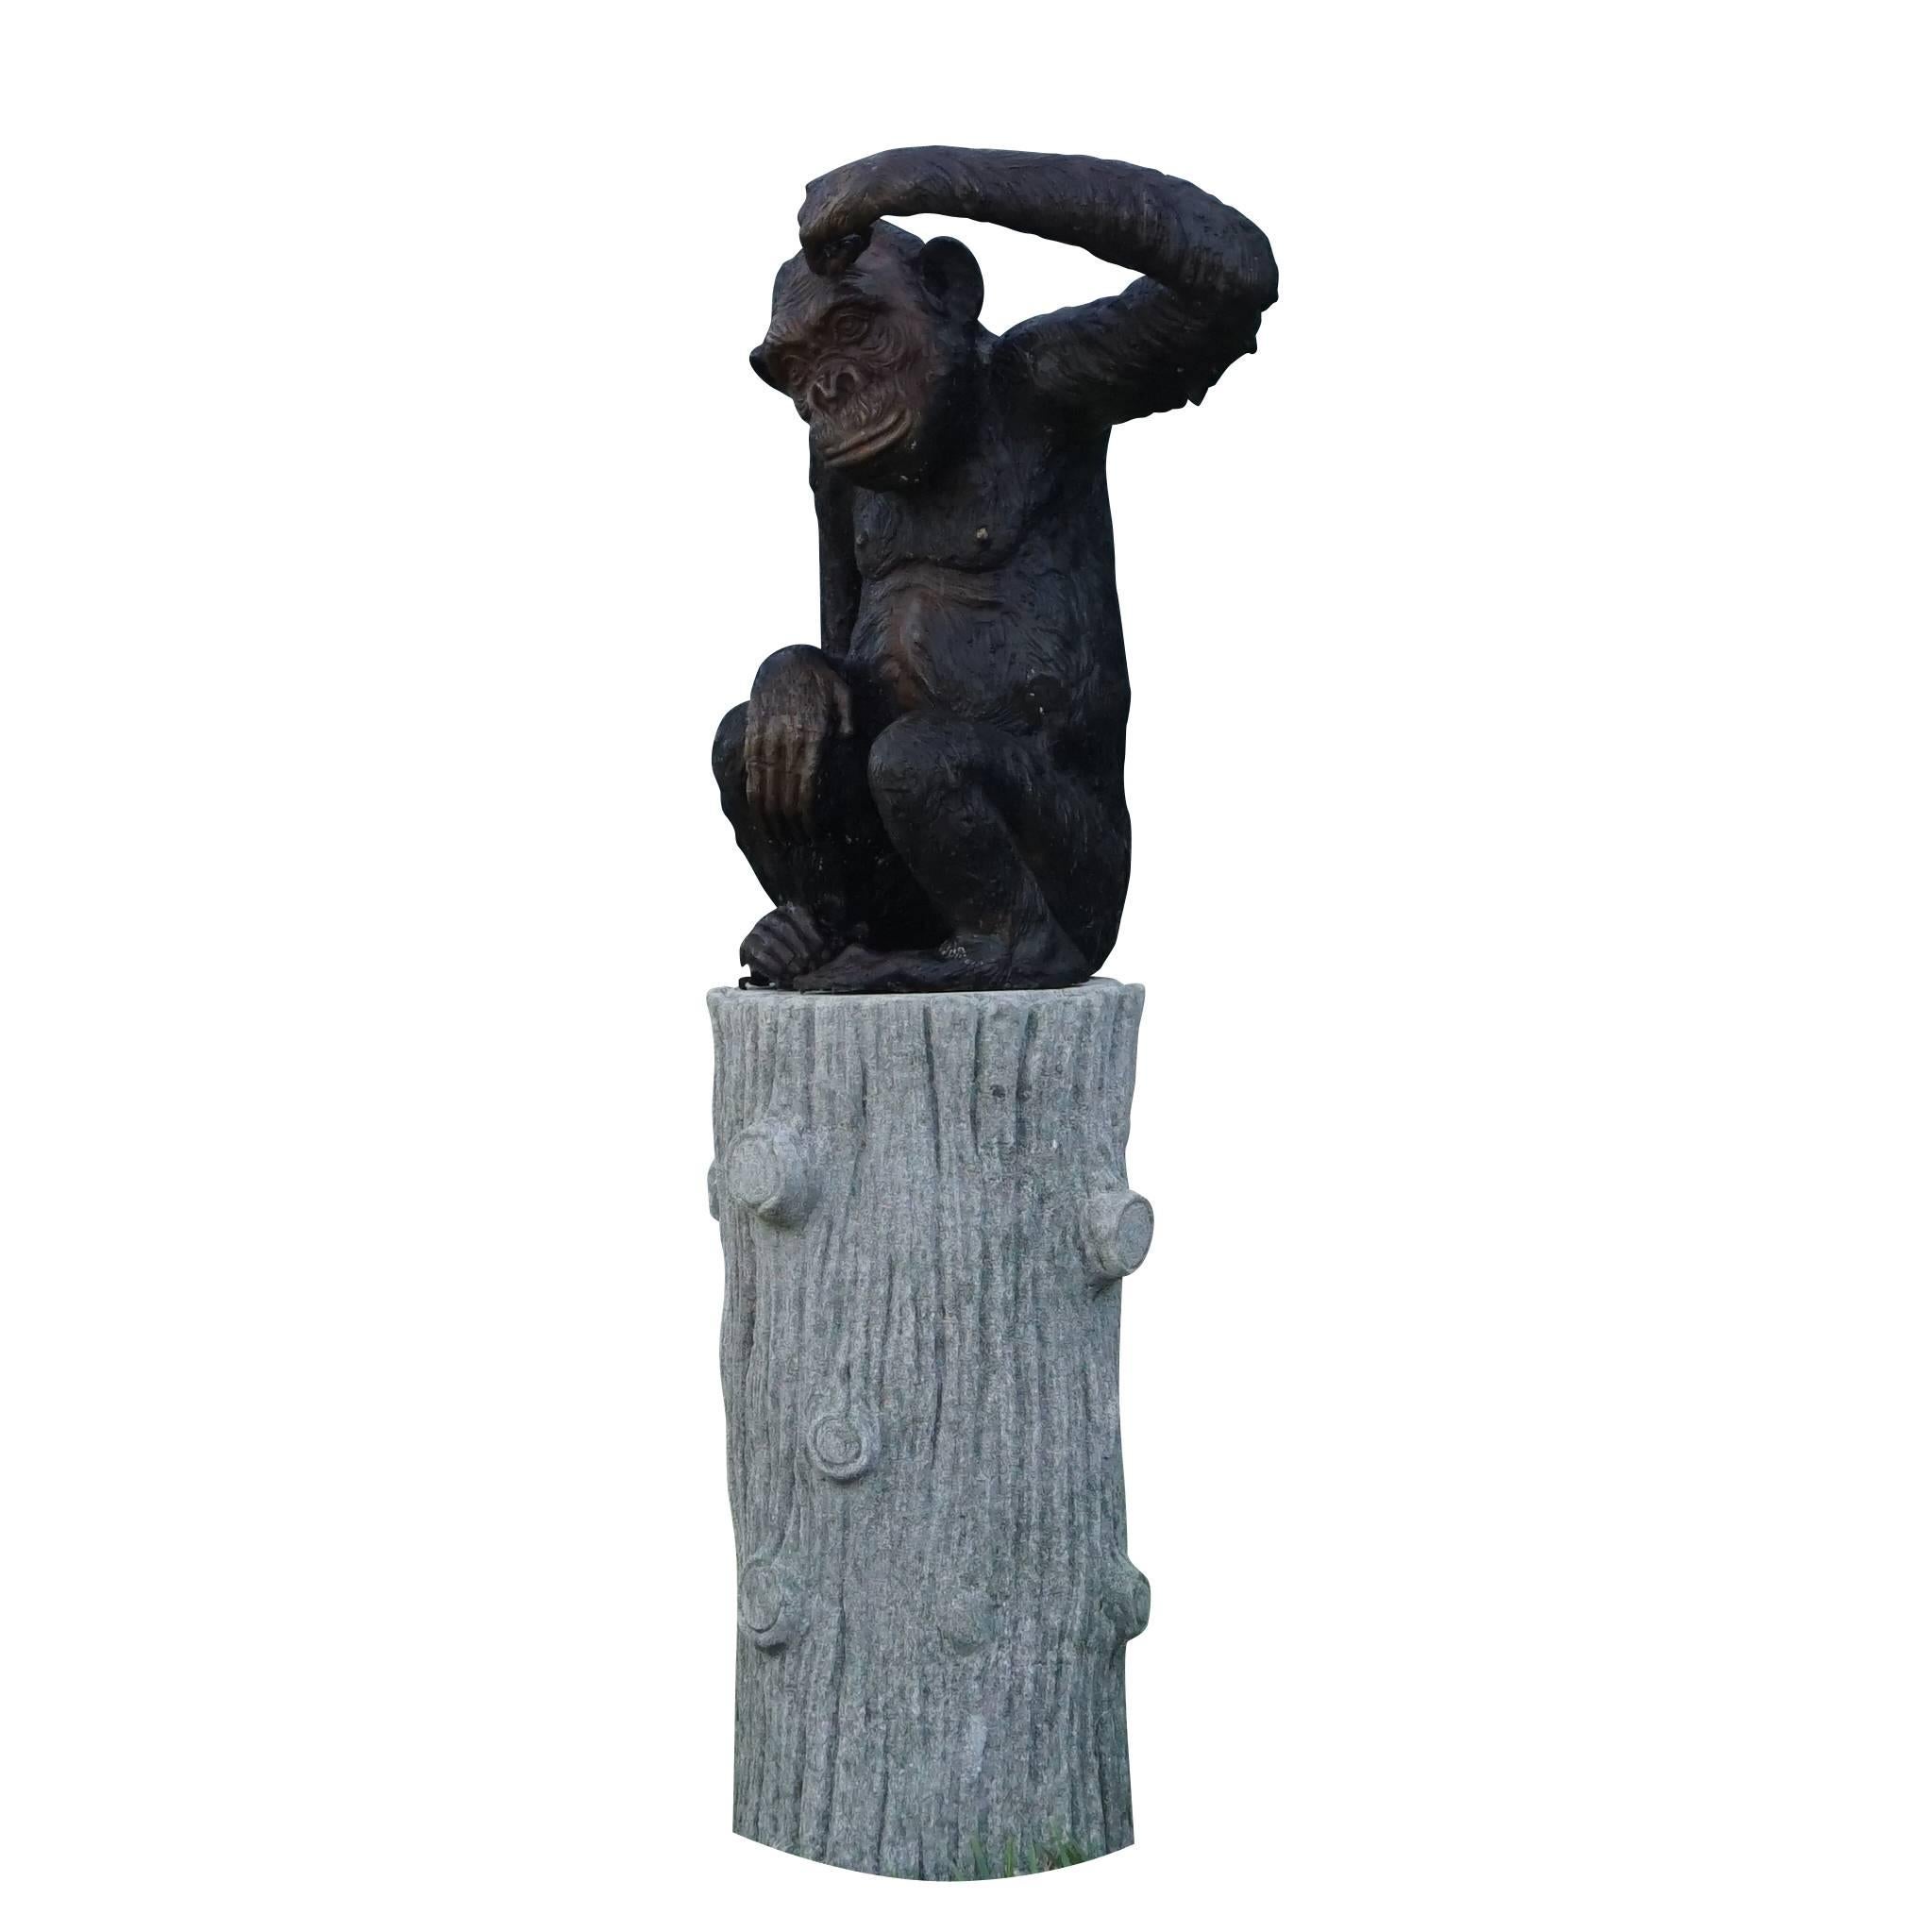 A vintage French bronze monkey statue is positioned onto a round faux bois tree trunk carved of solid limestone, in good condition. Wear consistent with age and use, circa 1920, Dijon, France.

Measures: Total statue height is 52